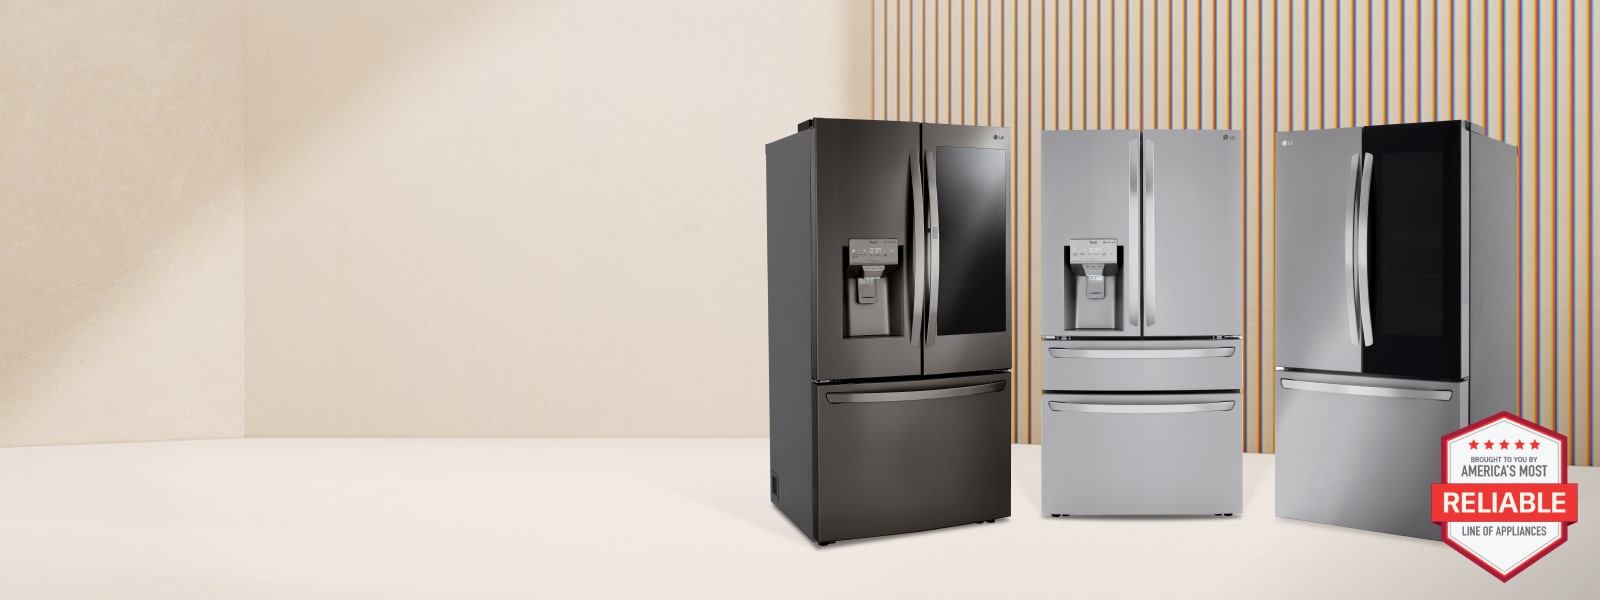 Upgrade to cool with 30-60% off select refrigerators